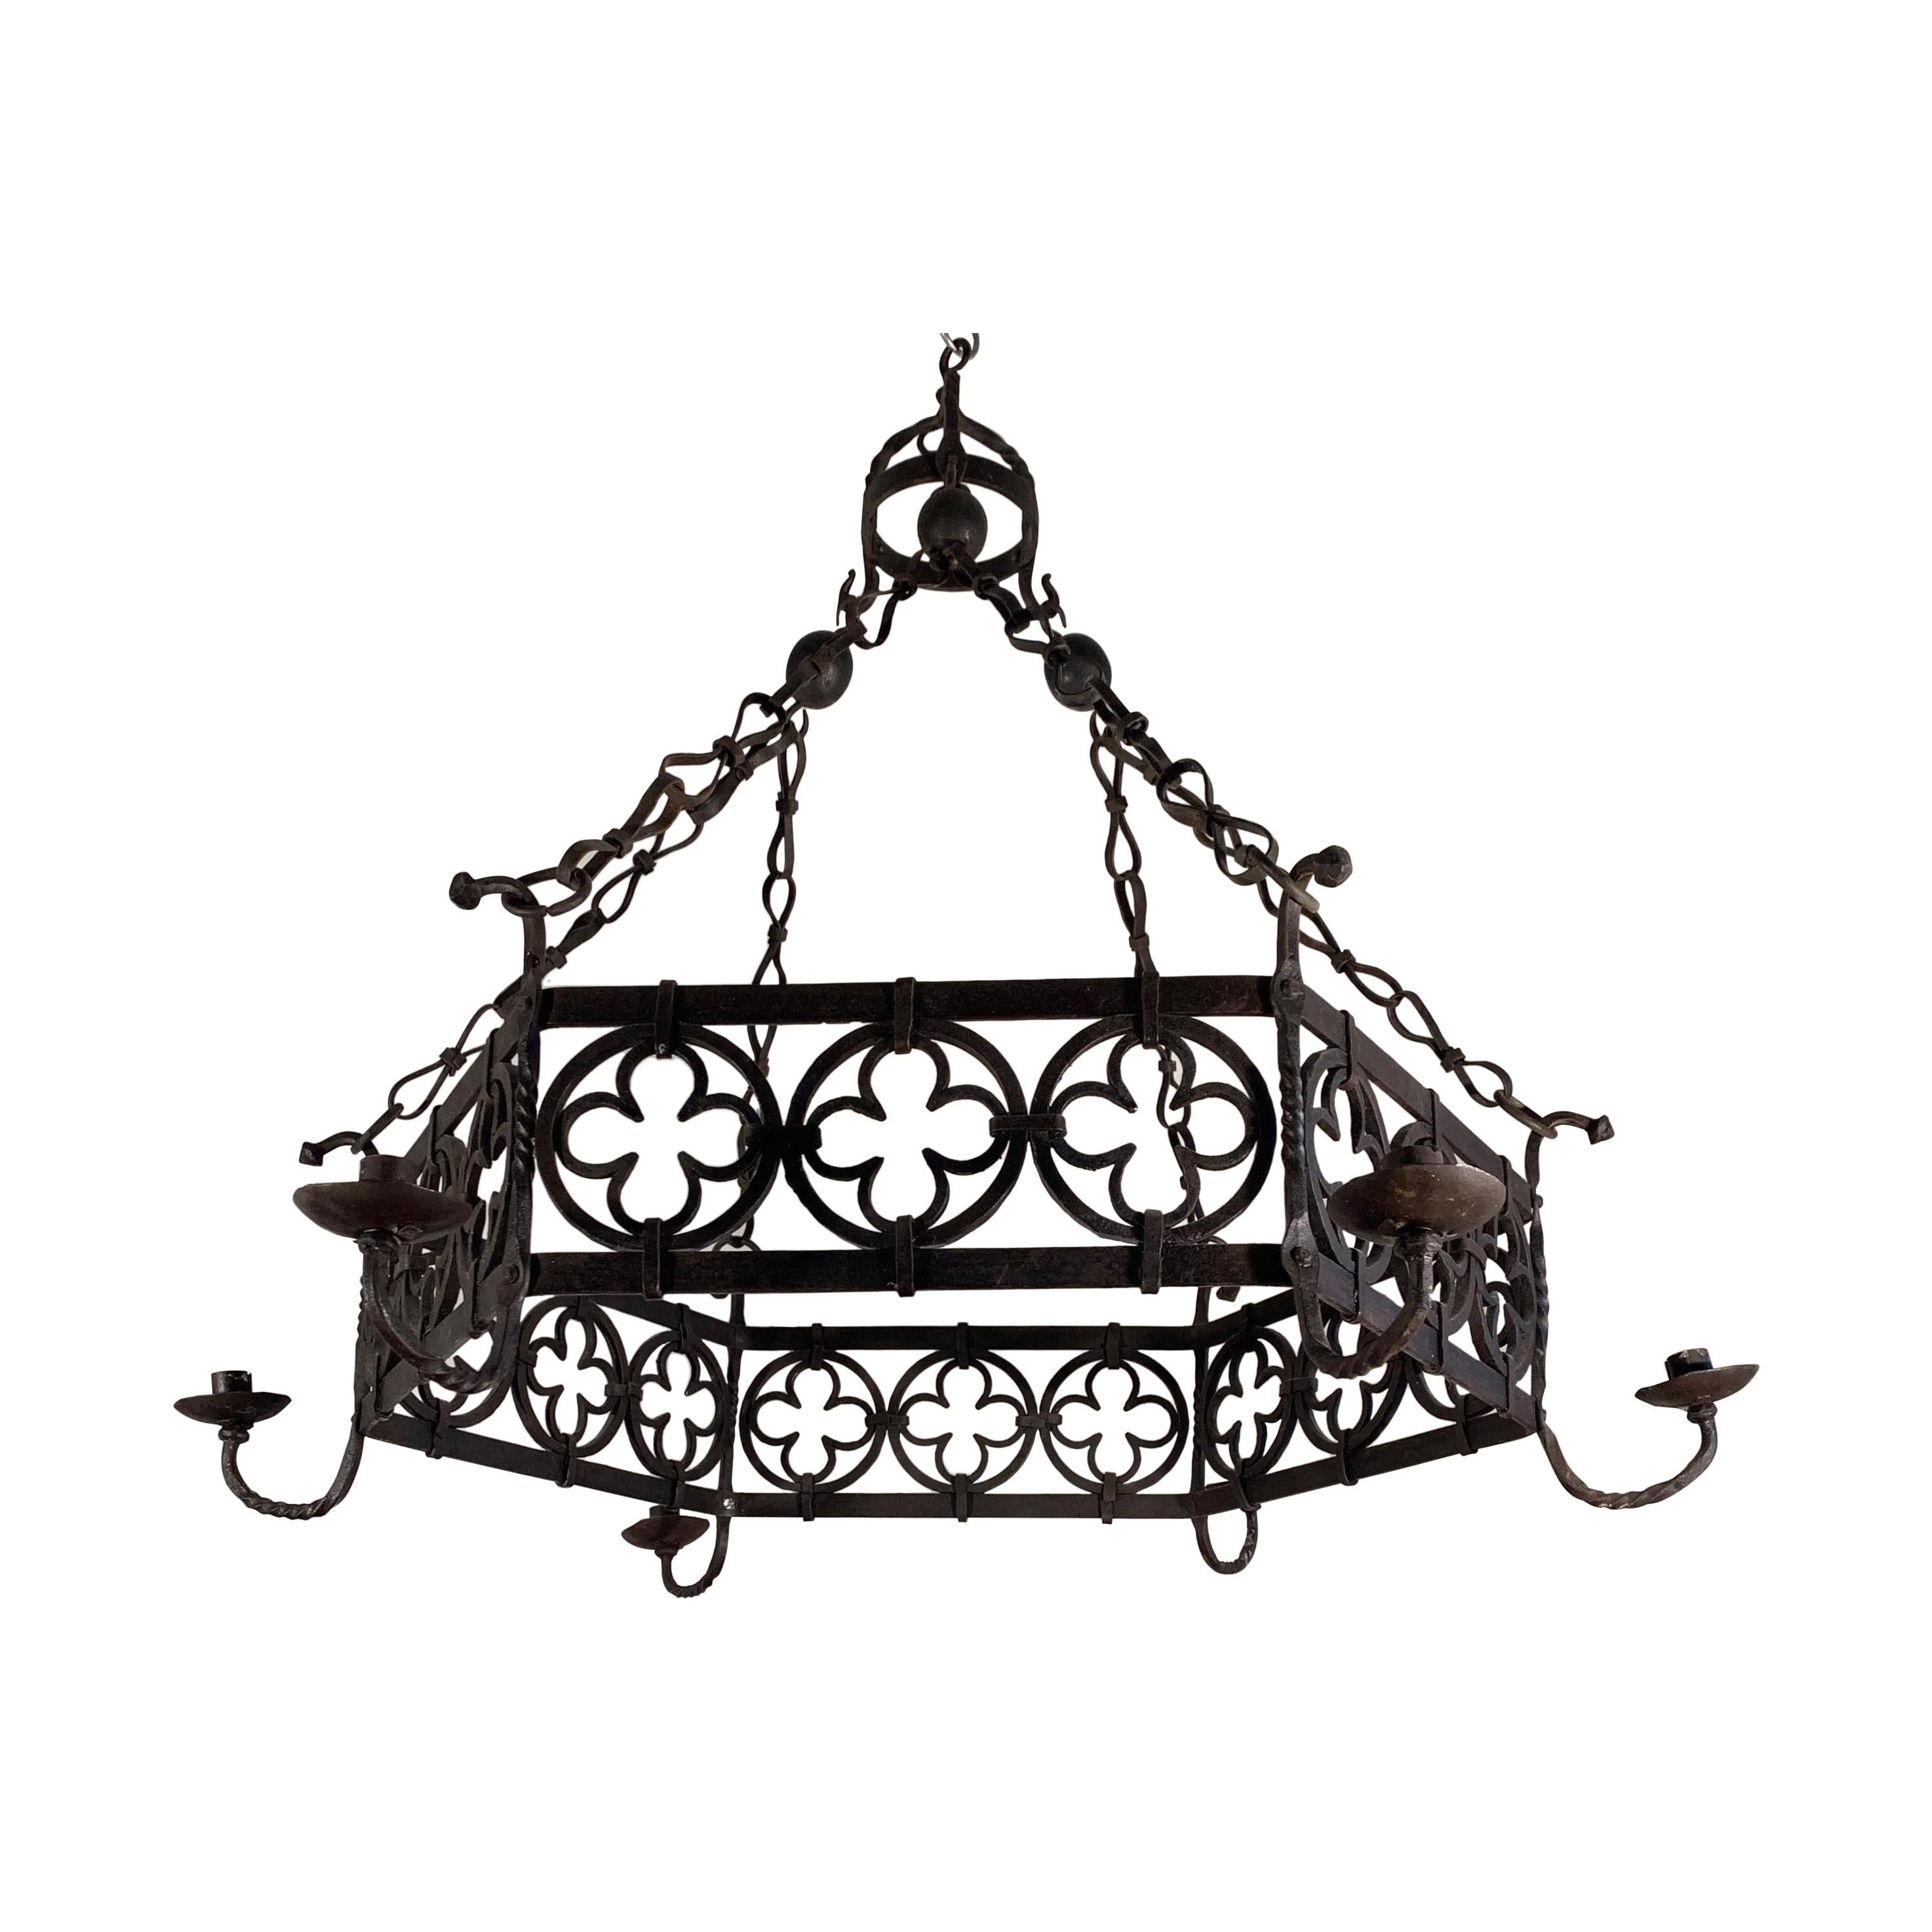 Large Gothic Revival Wrought Iron Chandelier for Dining Room / Restaurant Etc